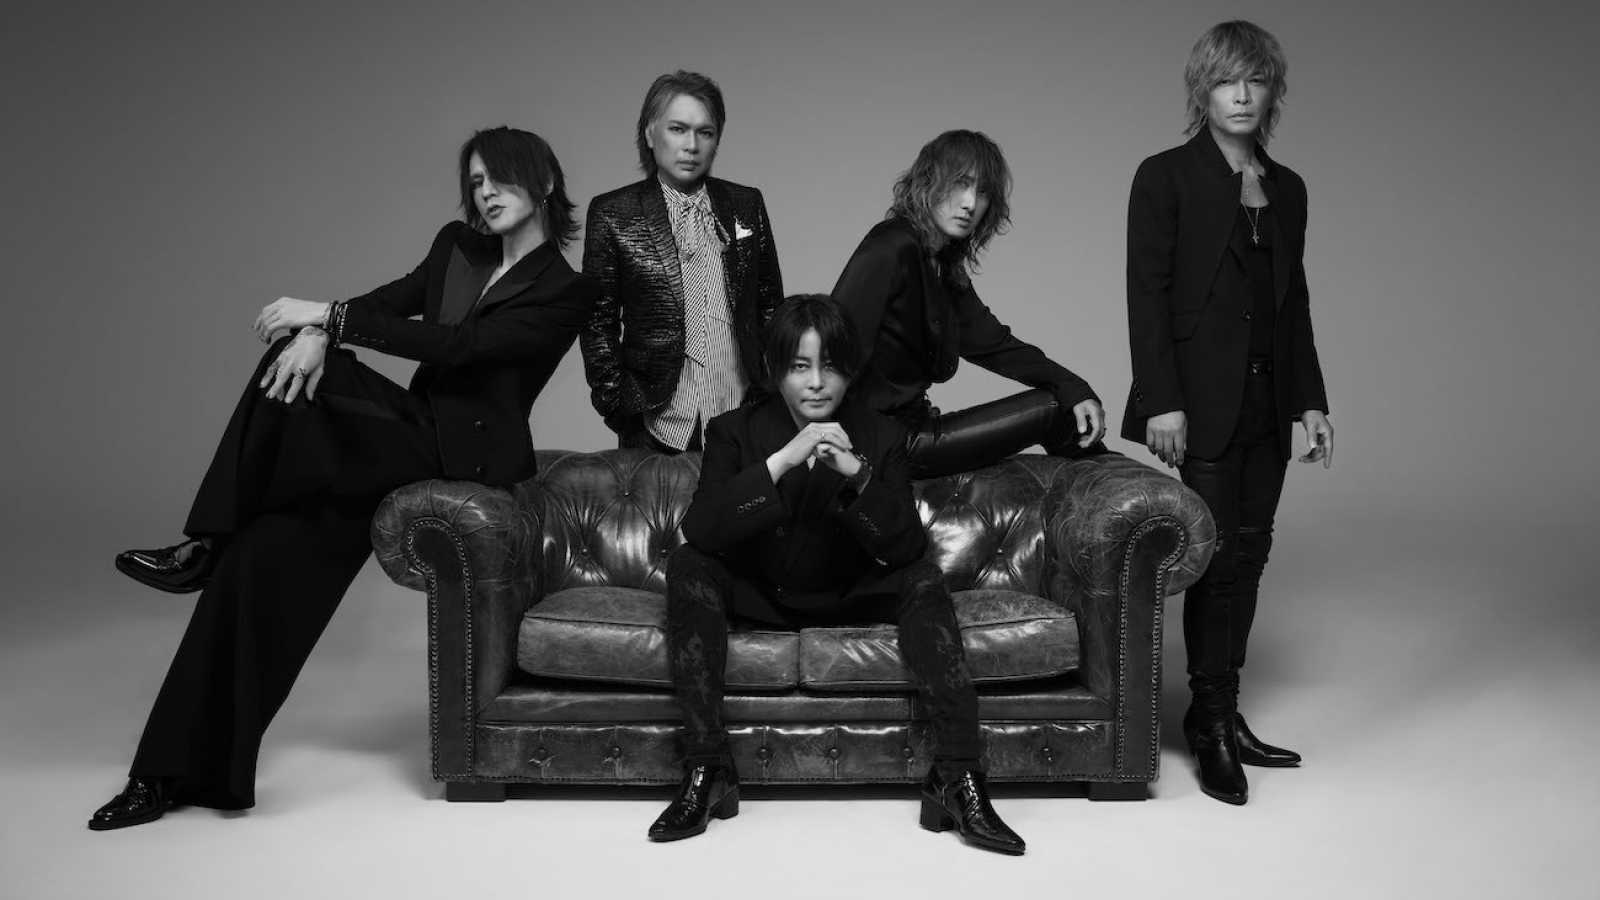 New Self-Cover Albums from LUNA SEA © LUNA SEA. All rights reserved.